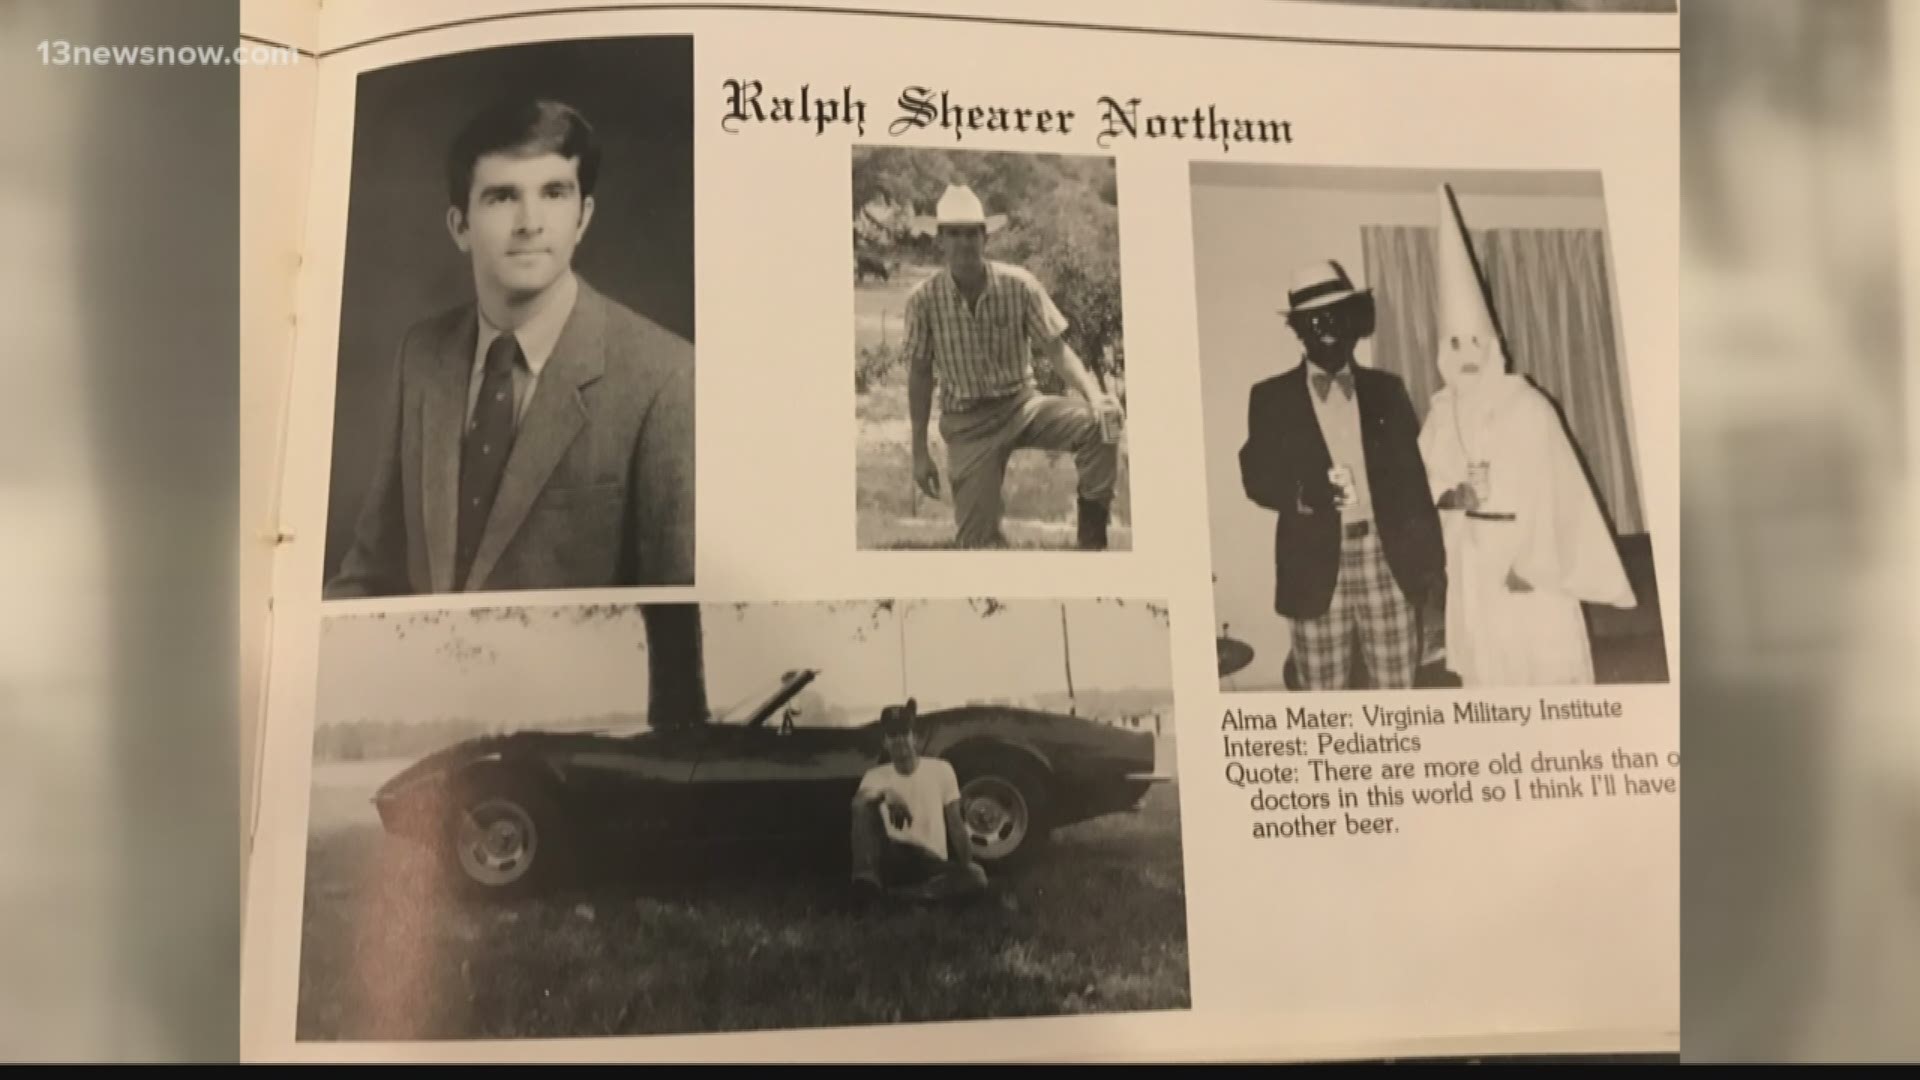 Governor Ralph Northam denied being in the racist yearbook photo.